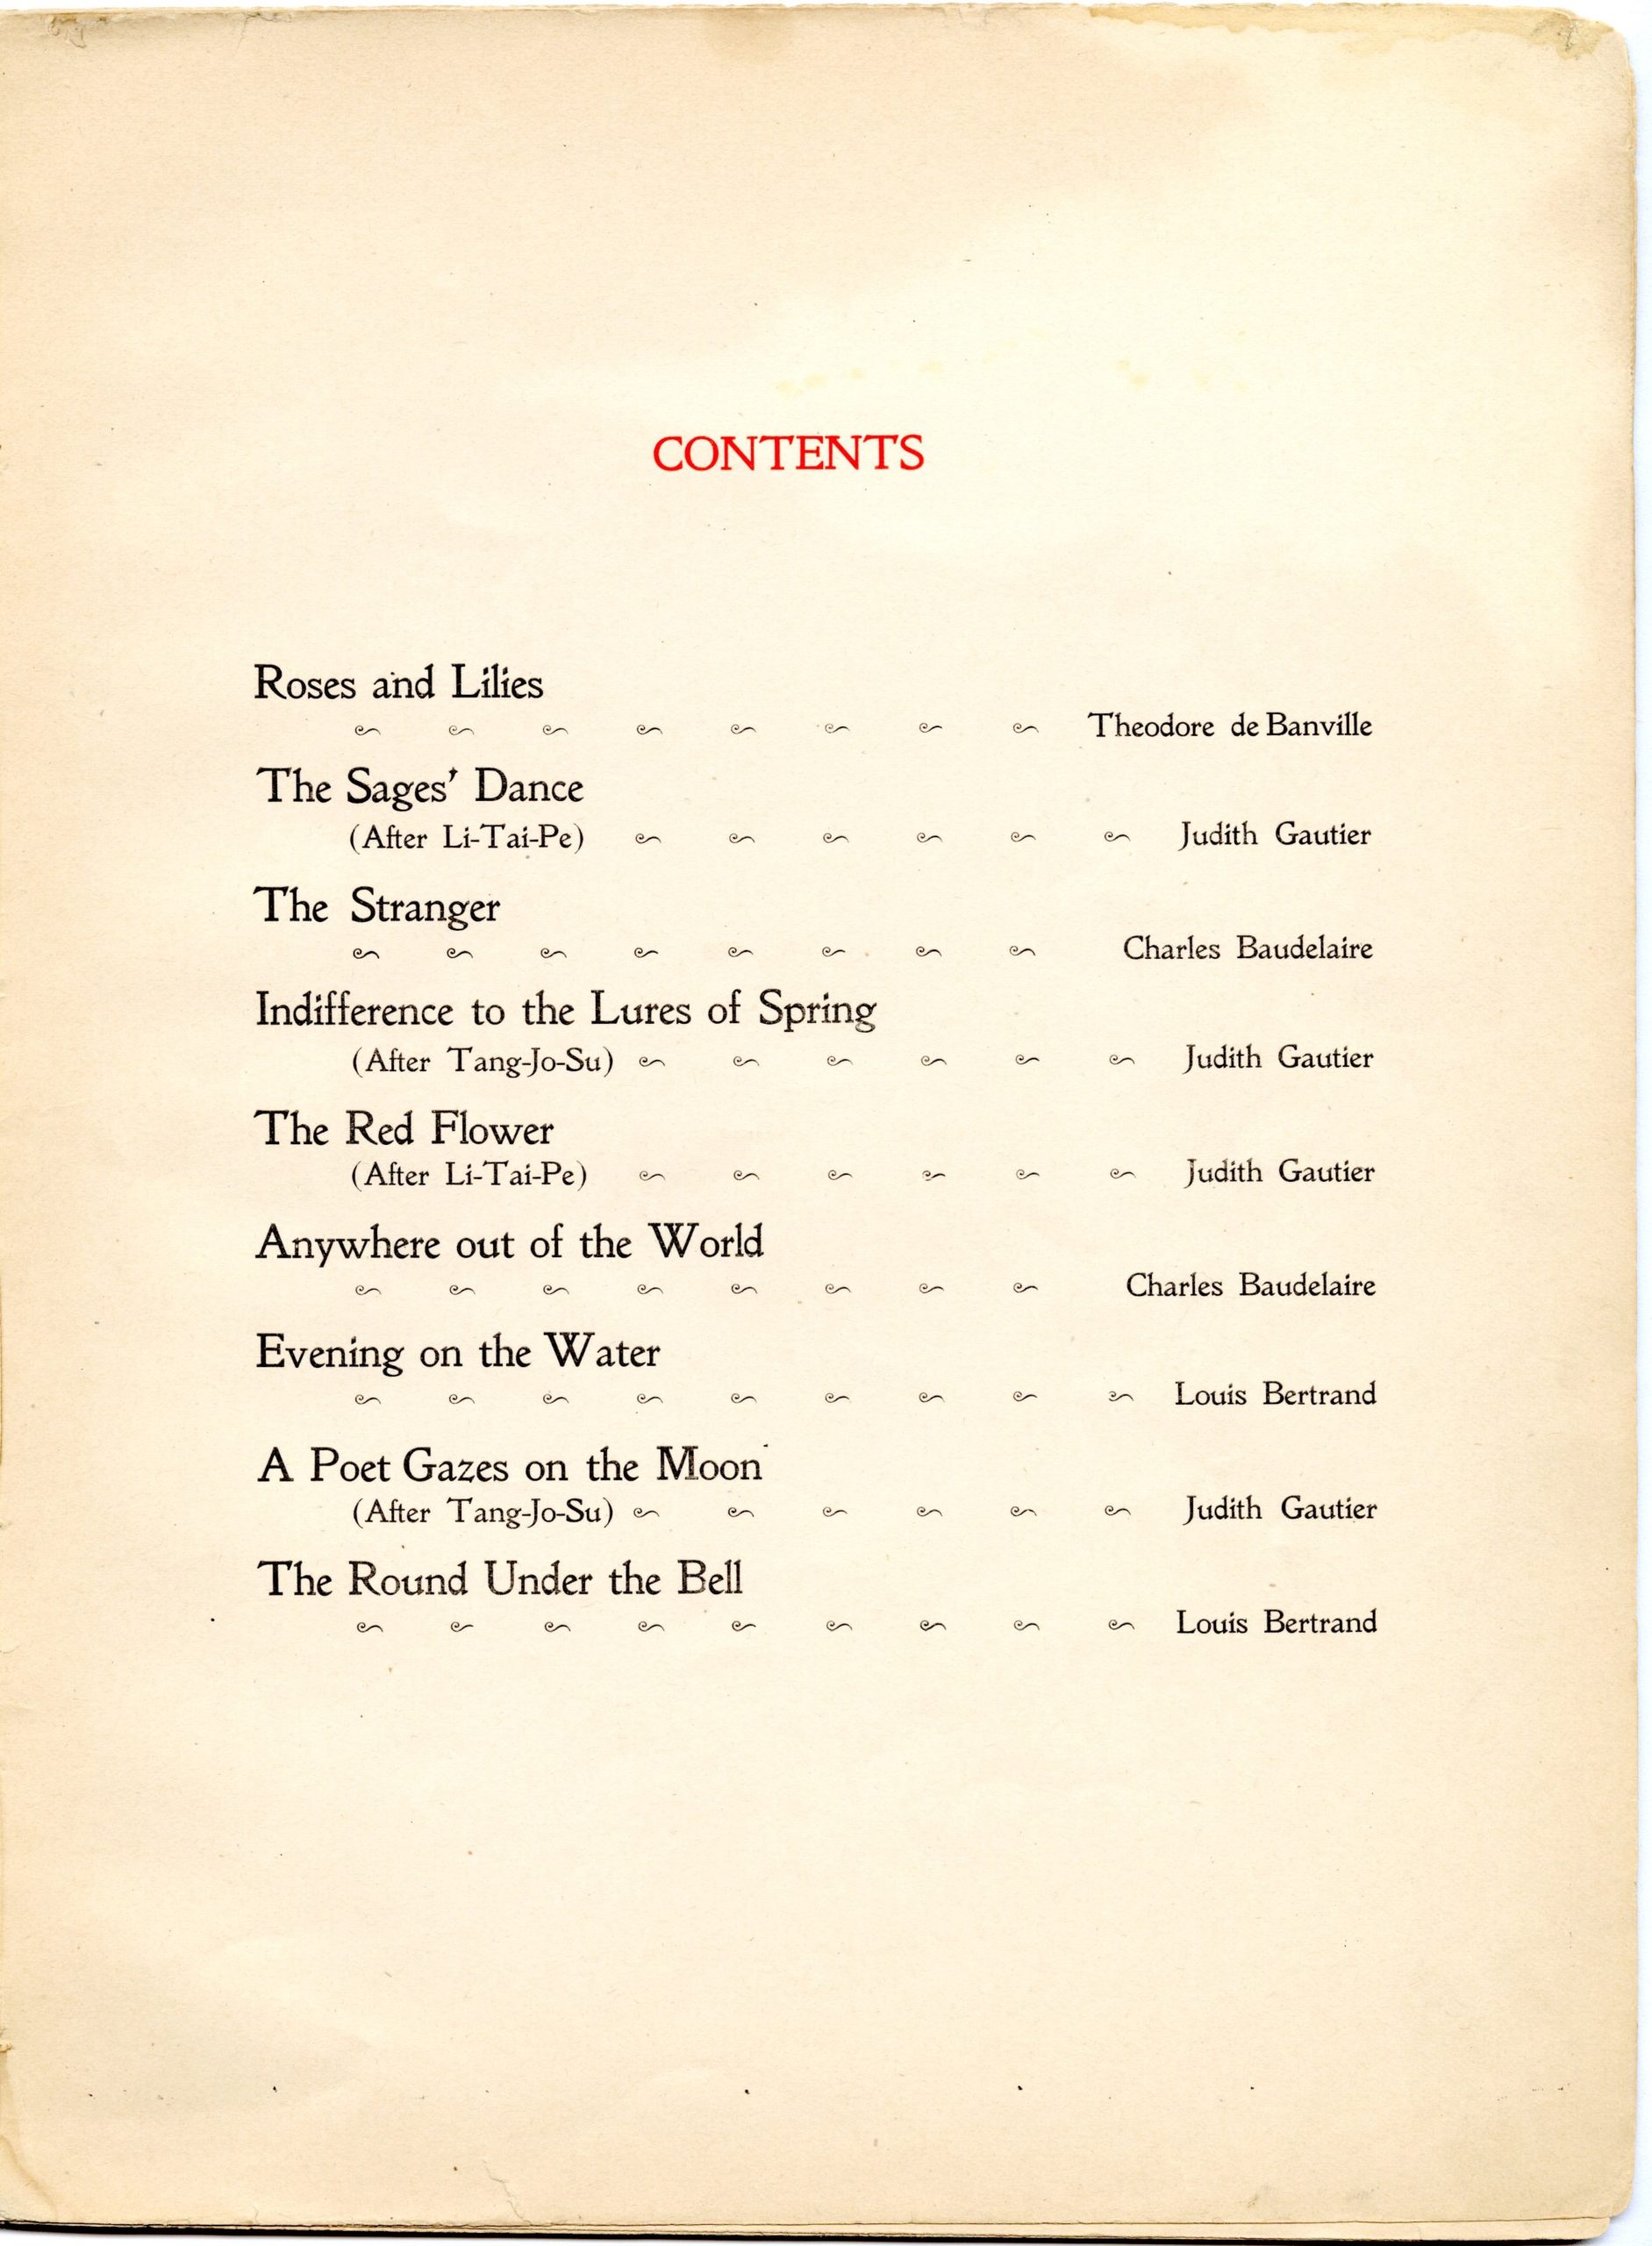 Table of contents from Tone Pictures score.